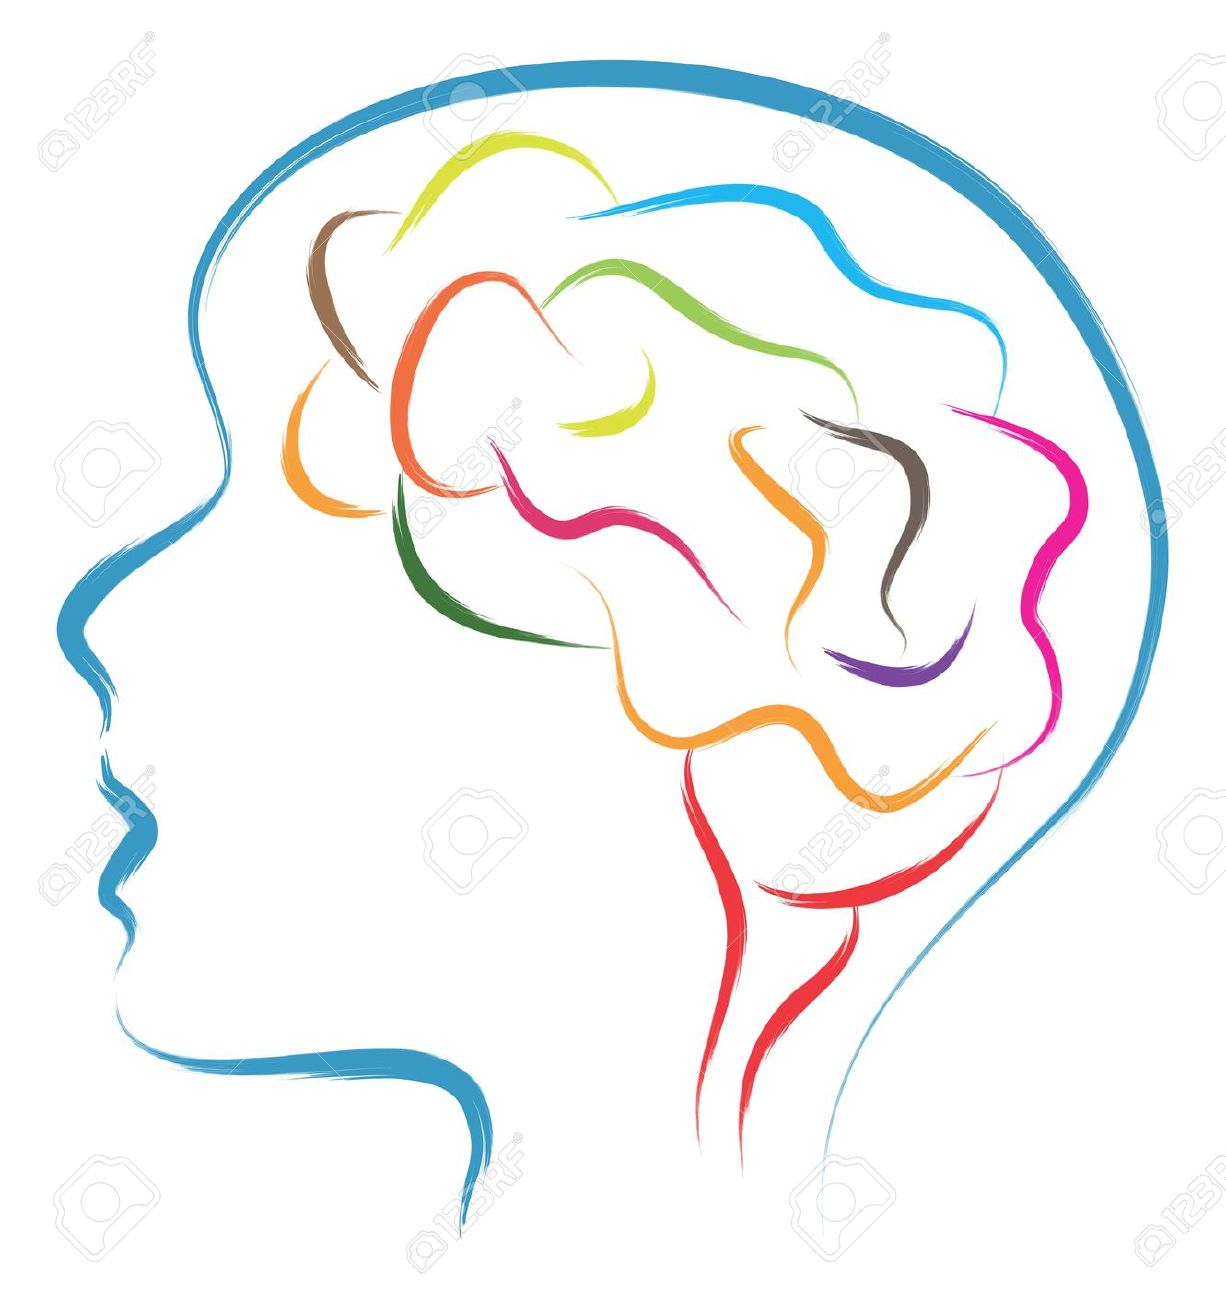 clipart brain outline - Clipground